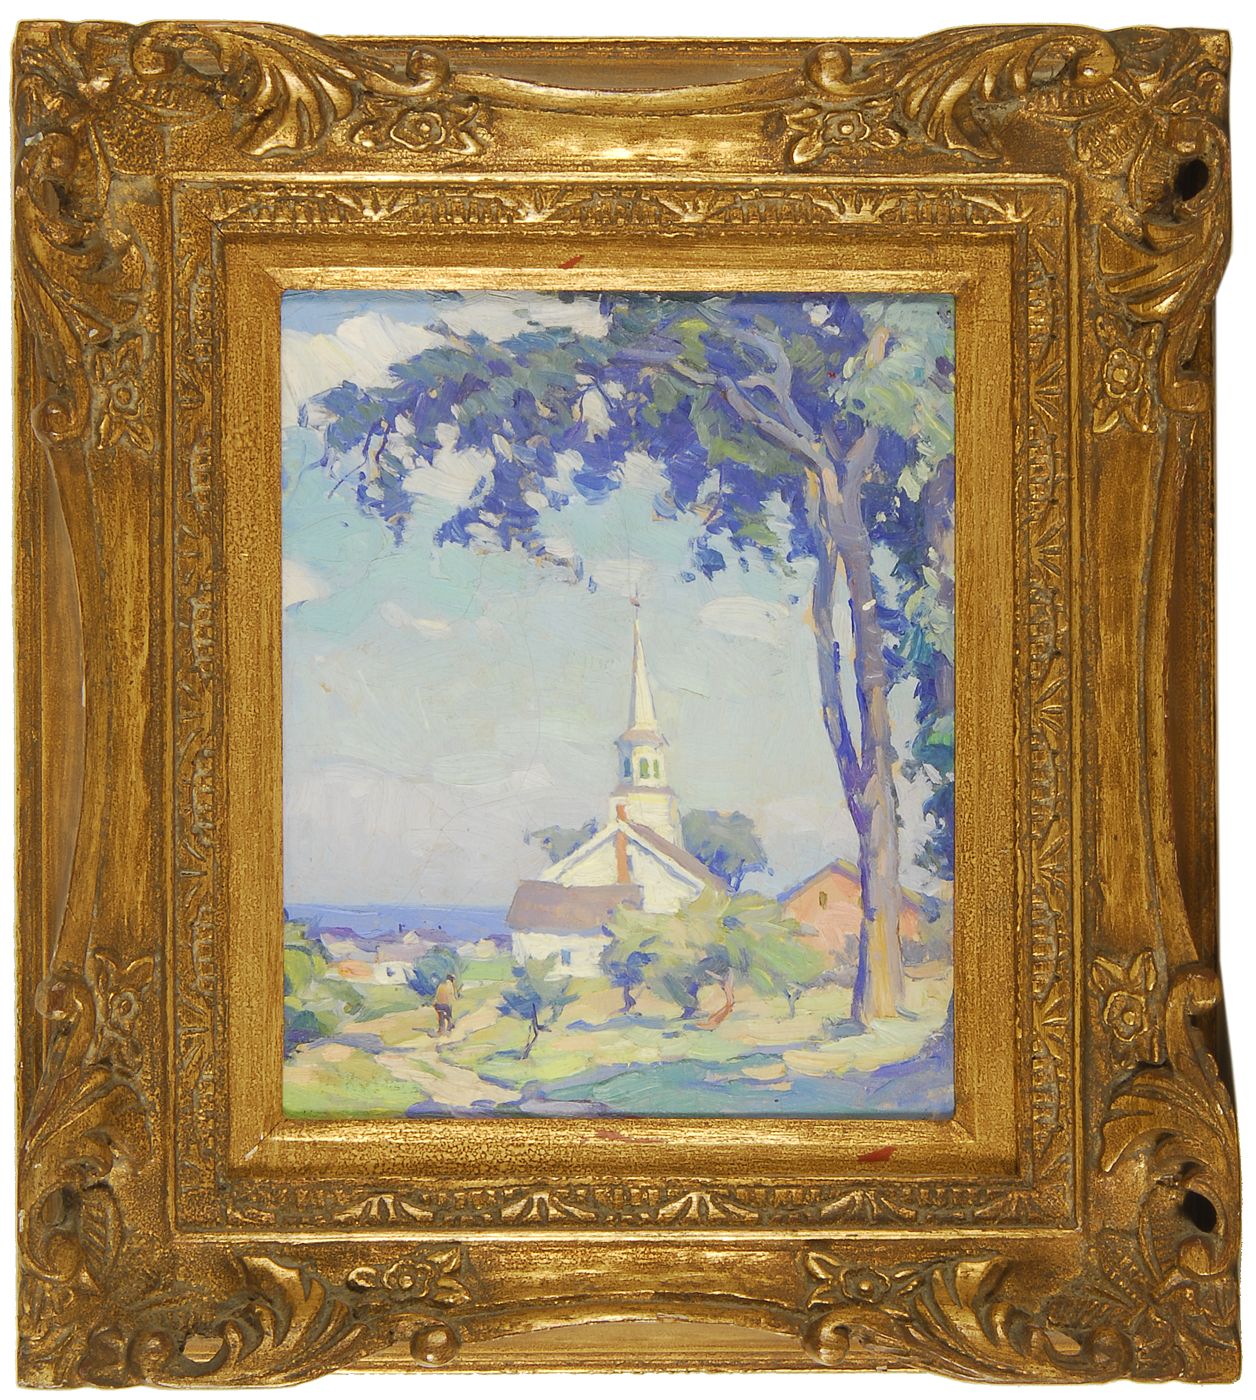 ATTRIBUTED TO MABEL MAY WOODWARDAmerican 14a9bd